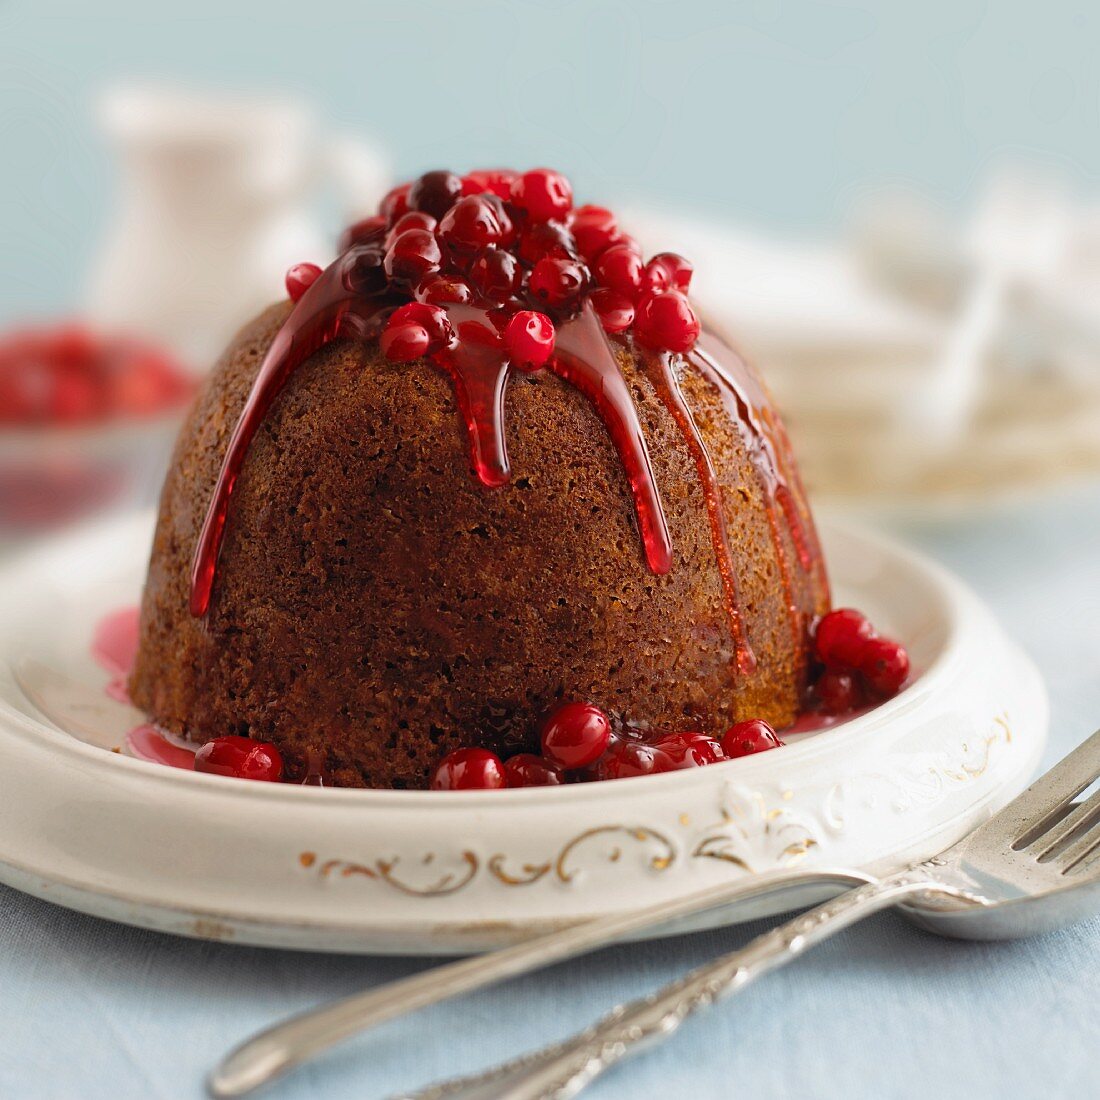 Cranberry pudding with fruit sauce